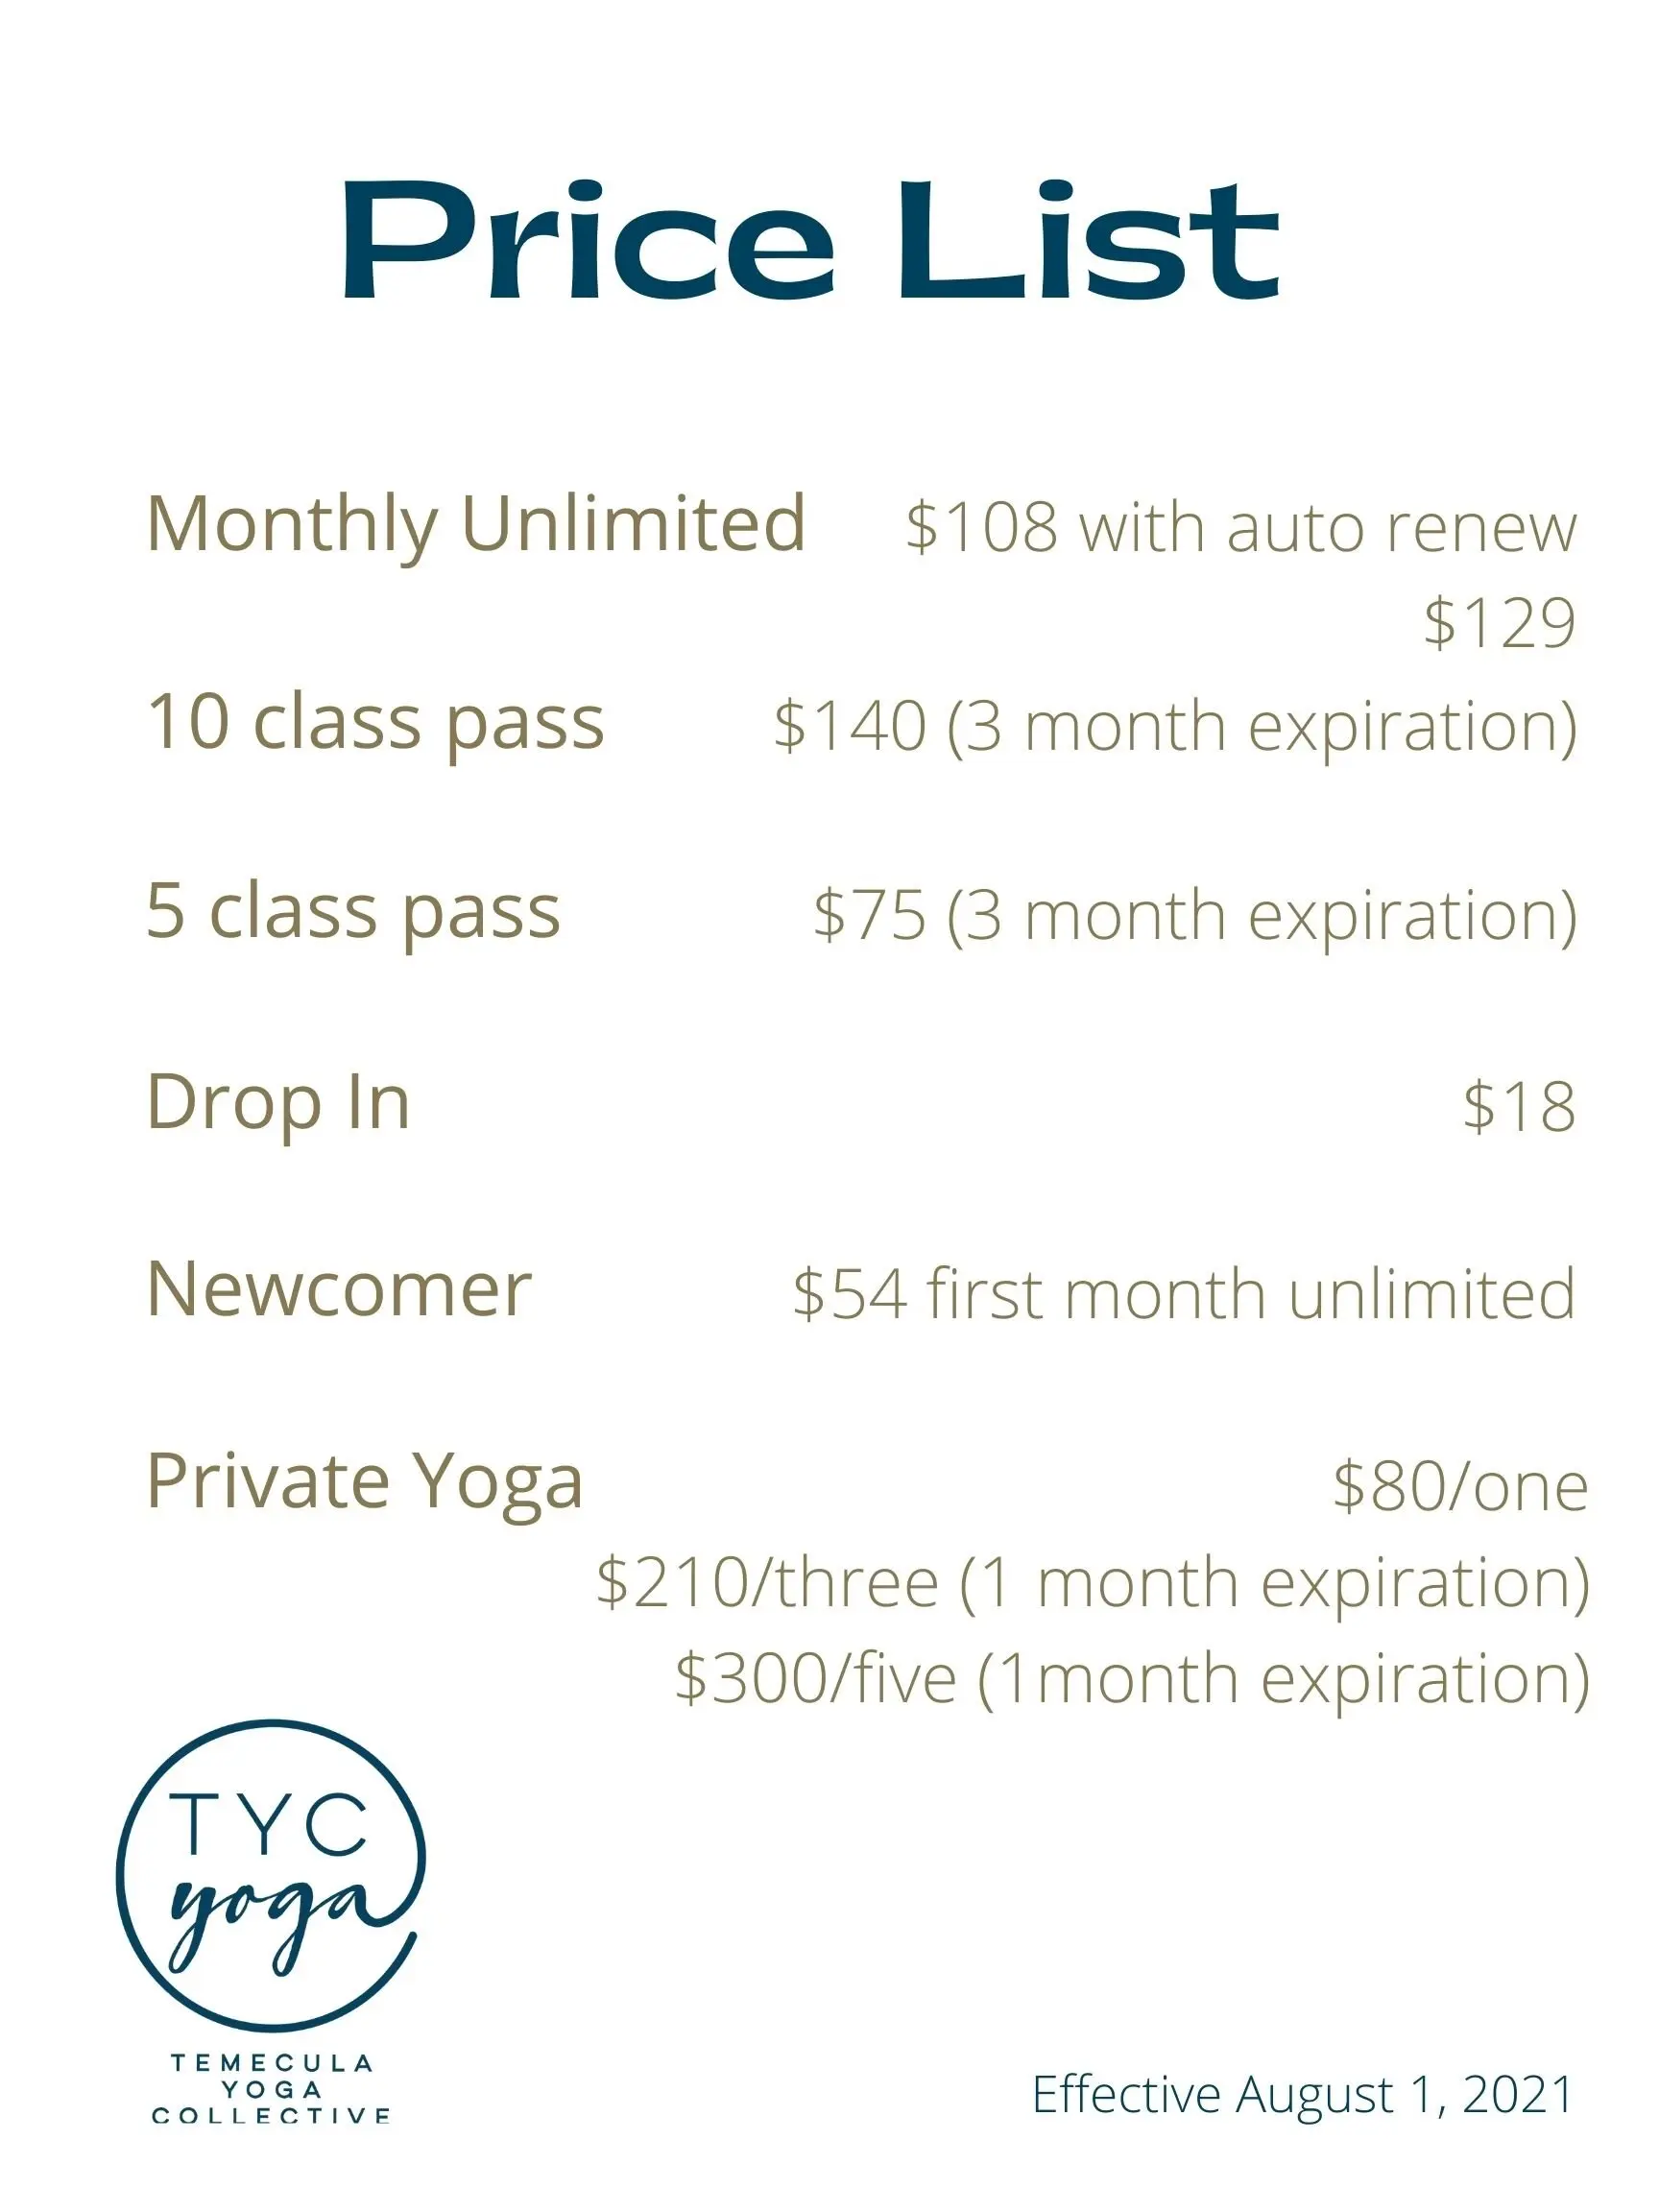 yoga studio prices - What is the average cost of a yoga class in the UK